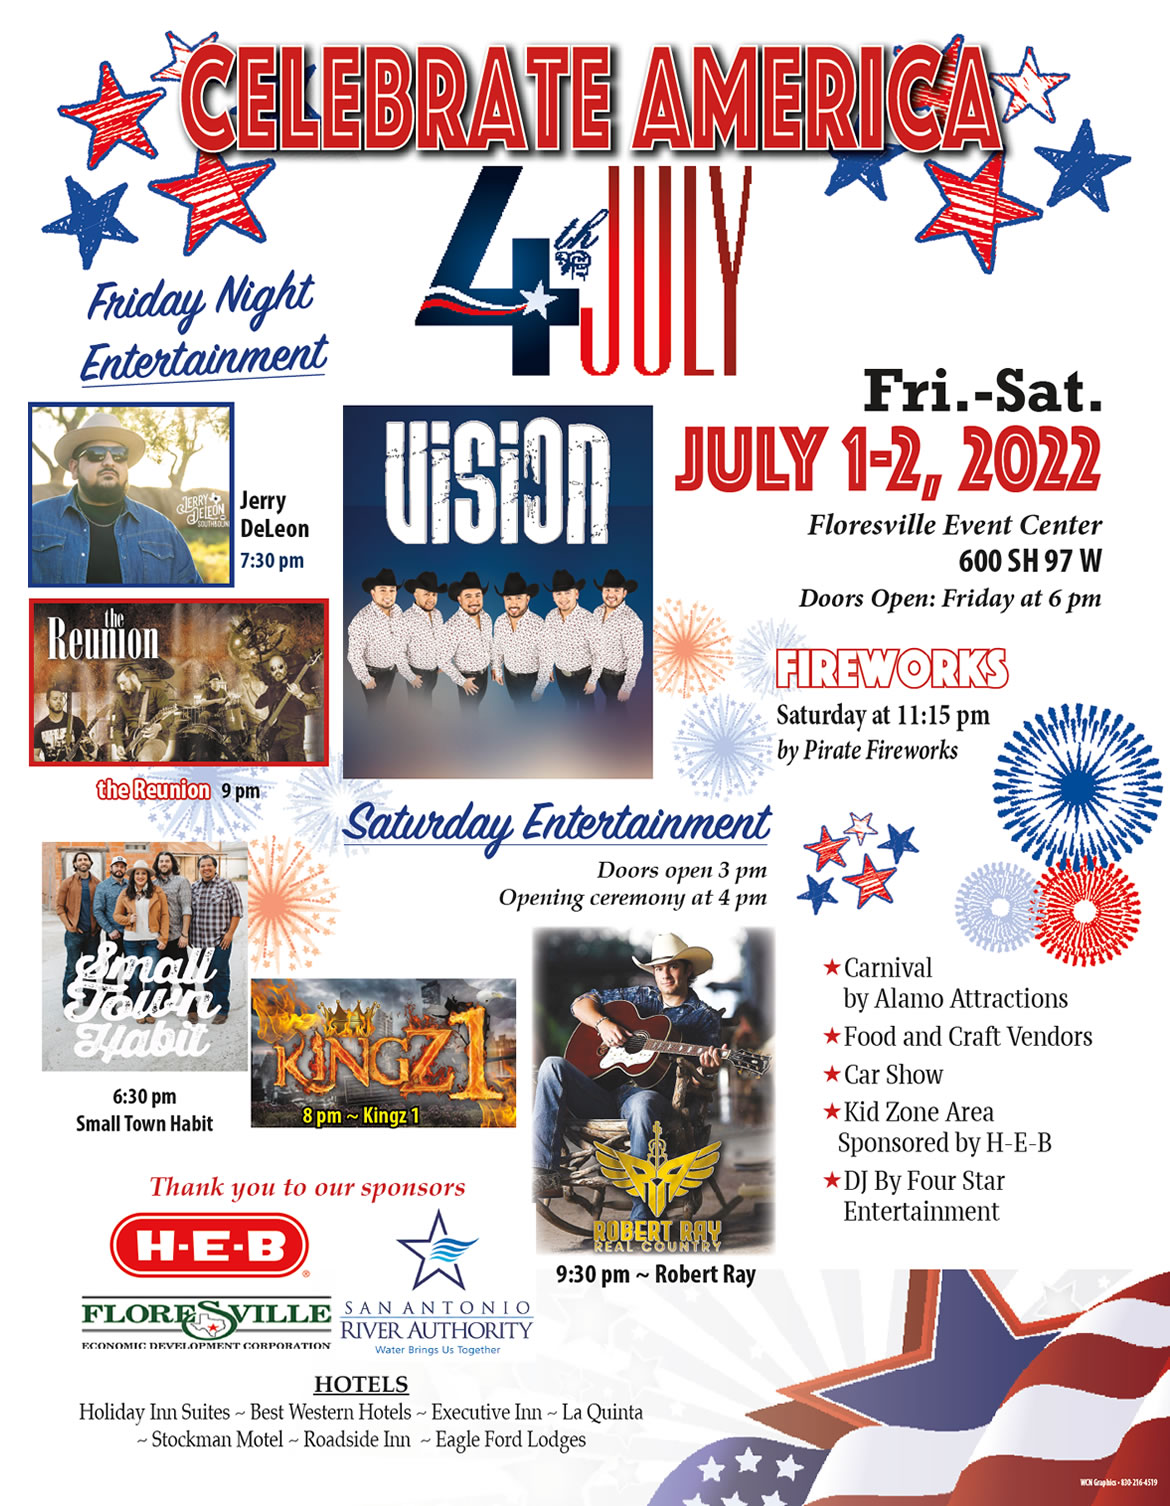 Celebrate America with us in Floresville, Texas! July 1-2, 2022